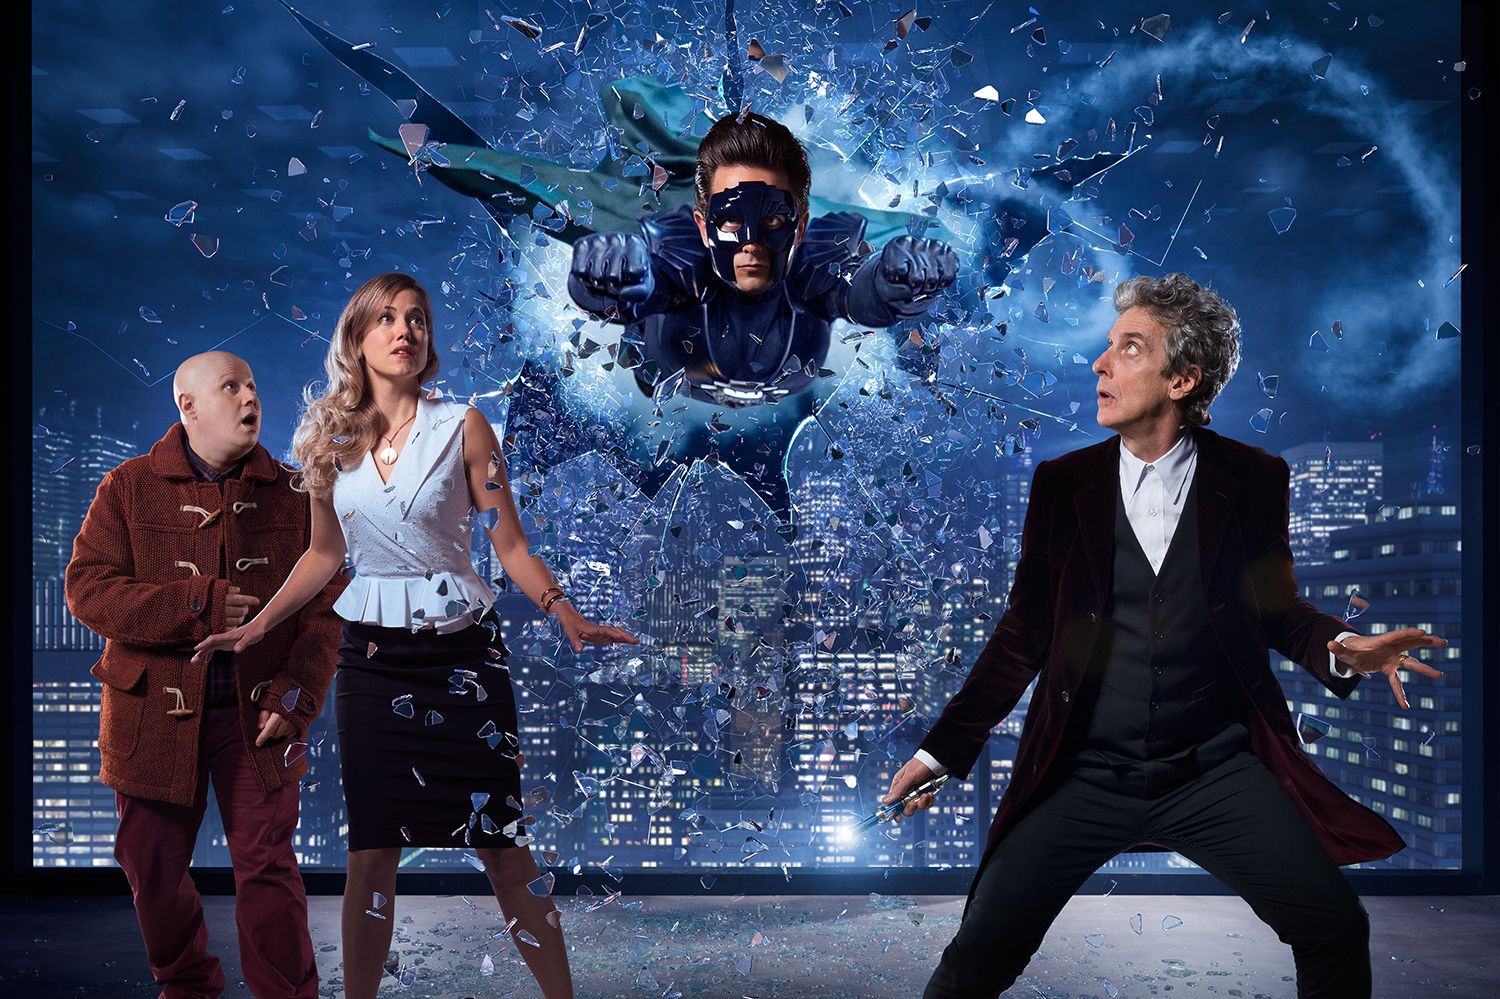 Picture shows: Matt Lucas as Nardole, Charity Wakefield as Lucy, Justin Chatwin as The Ghost and Peter Capaldi as The Doctor